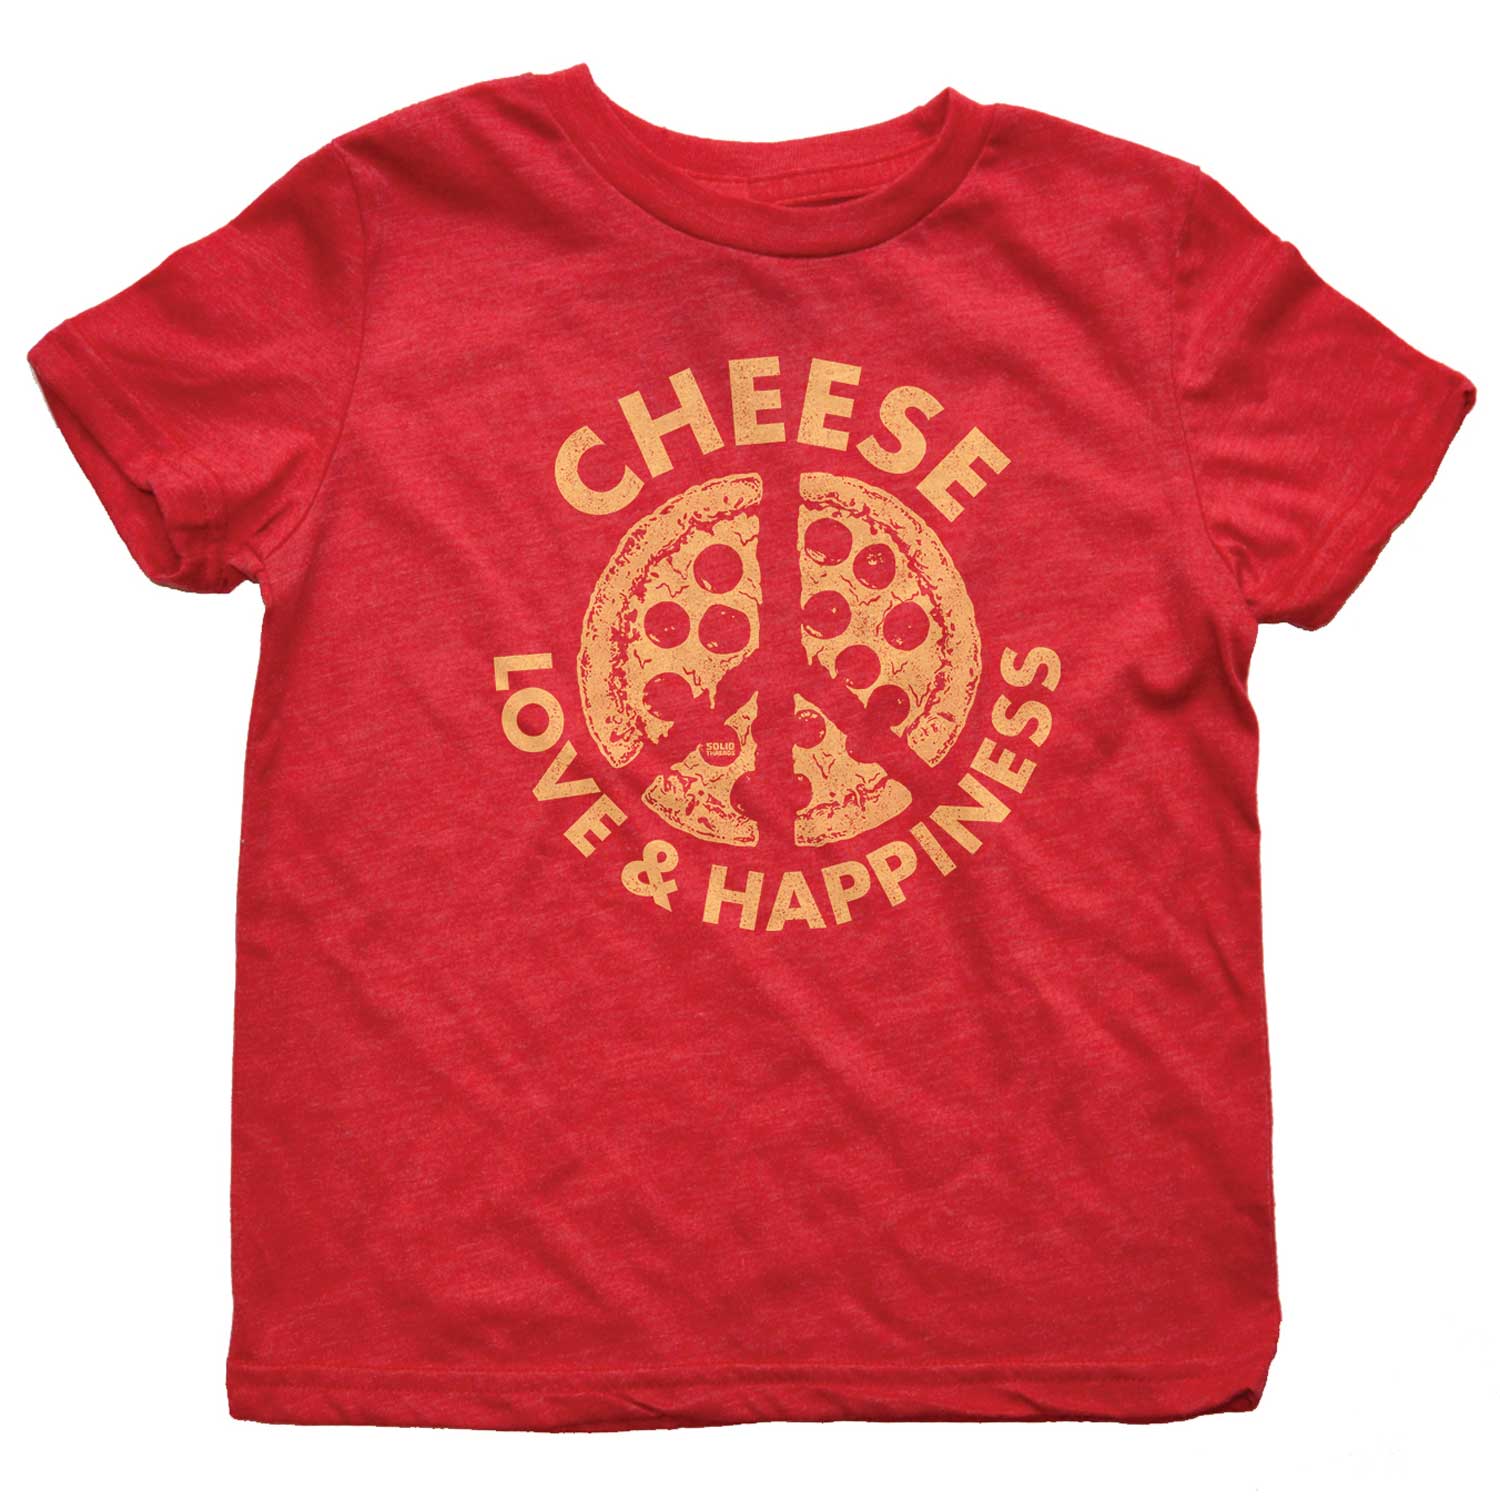 Kid's Cheese Love & Happiness Retro Pizza Graphic Tee | Cute Peace Sign T-shirt | Solid Threads